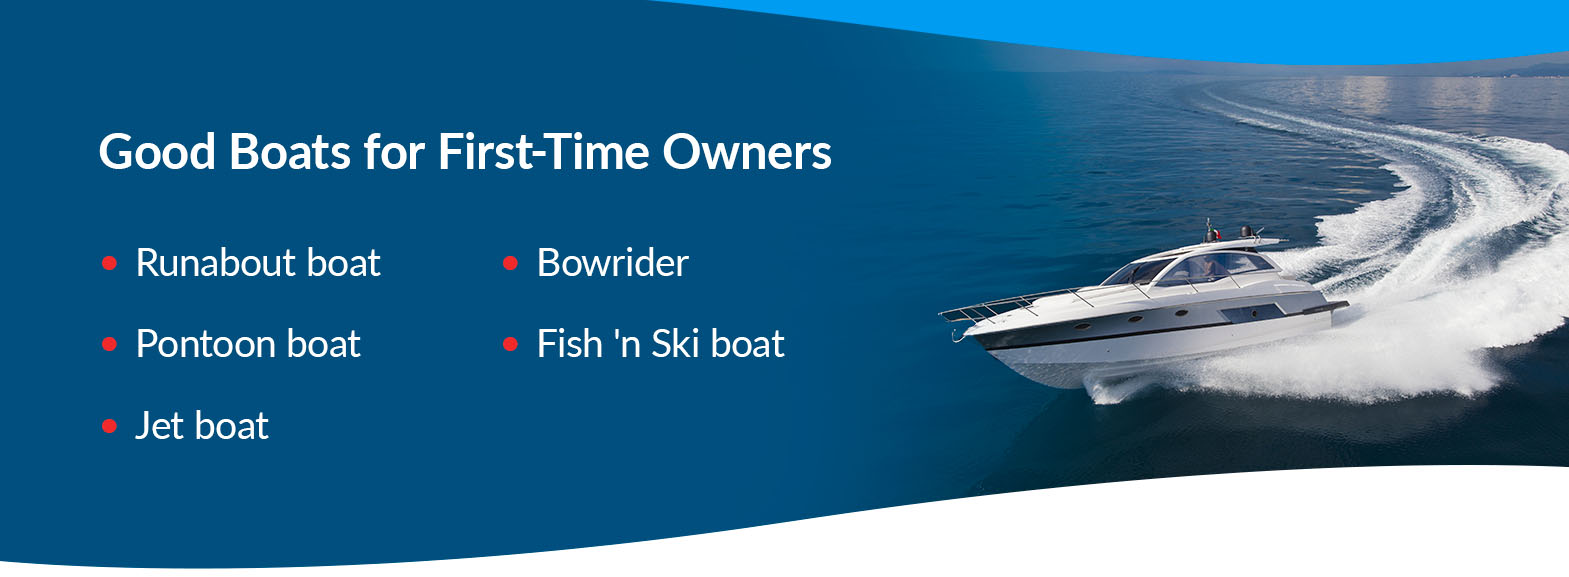 Good Boats for First-Time Owners